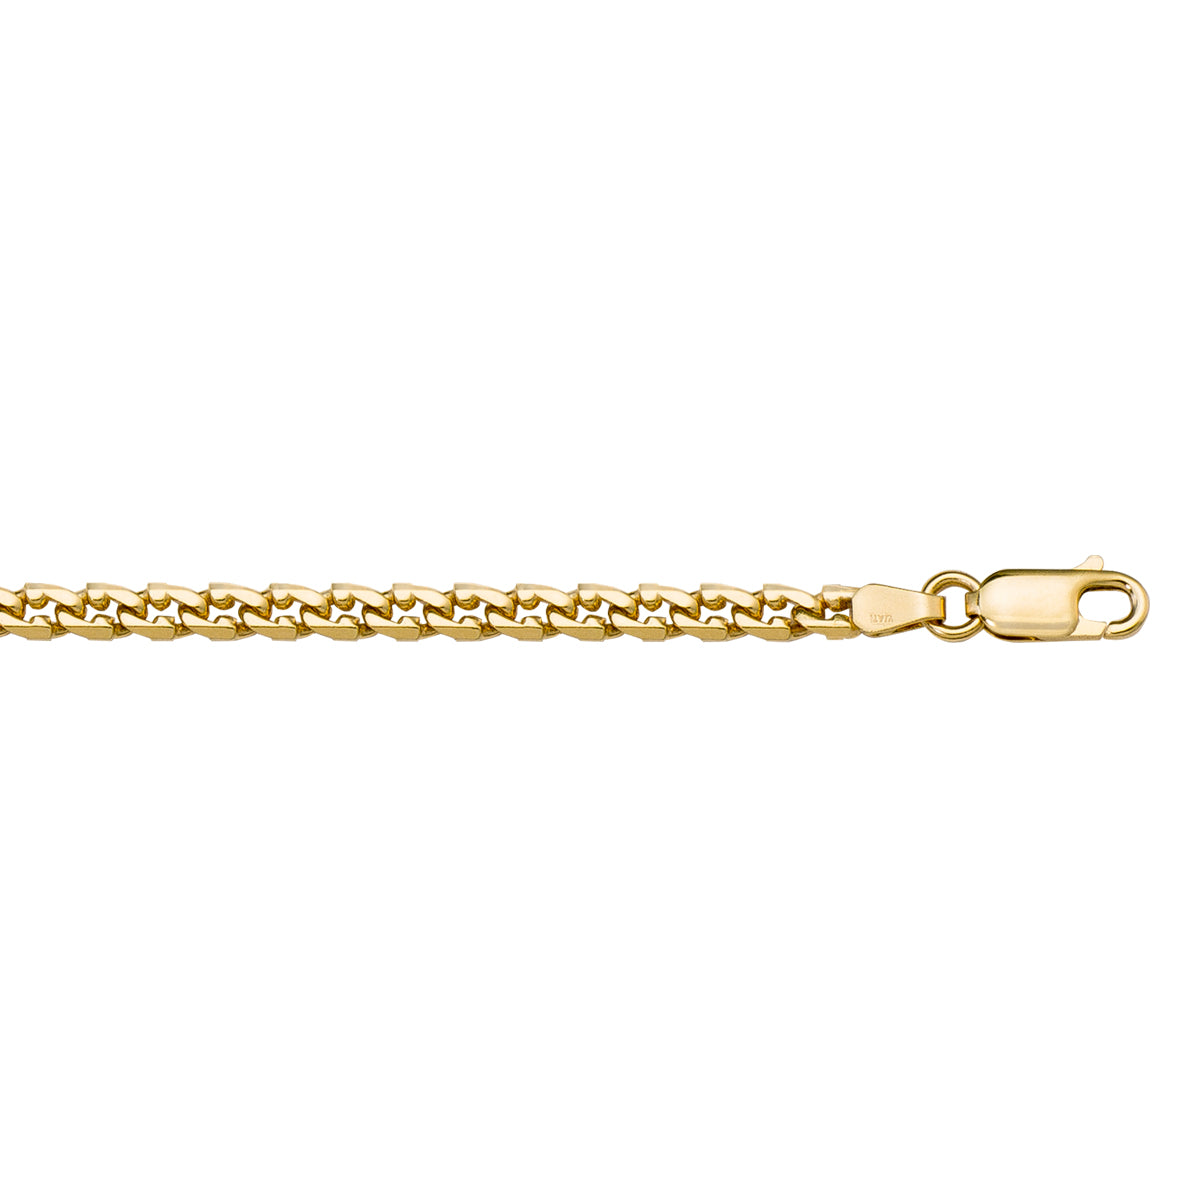 BRACELETS YELLOW GOLD SOLID L.F. LINK CHAIN